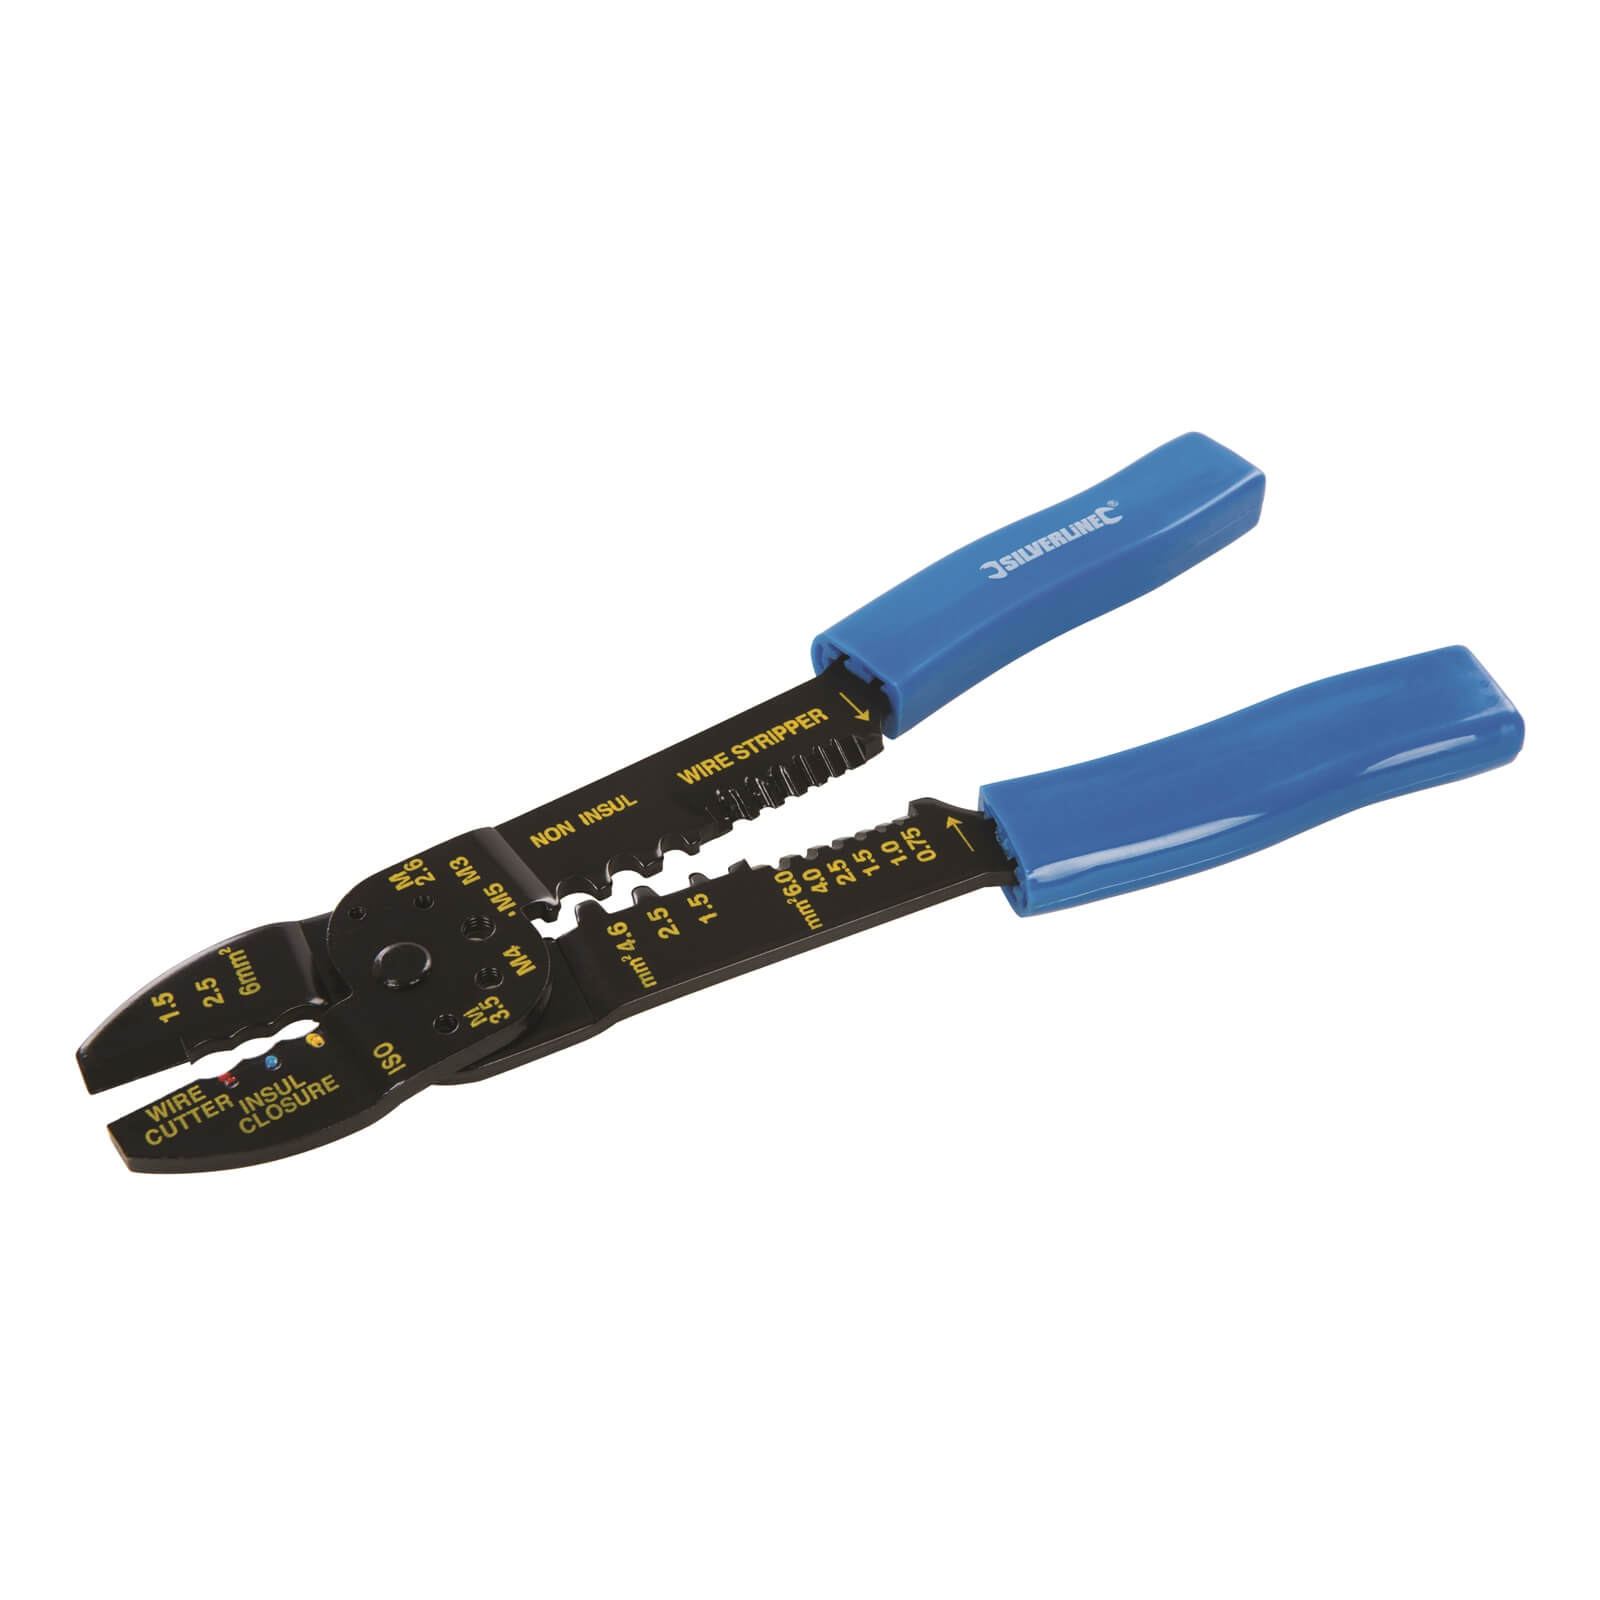 Photo of Silverline Crimping & Stripping Pliers - 230mm